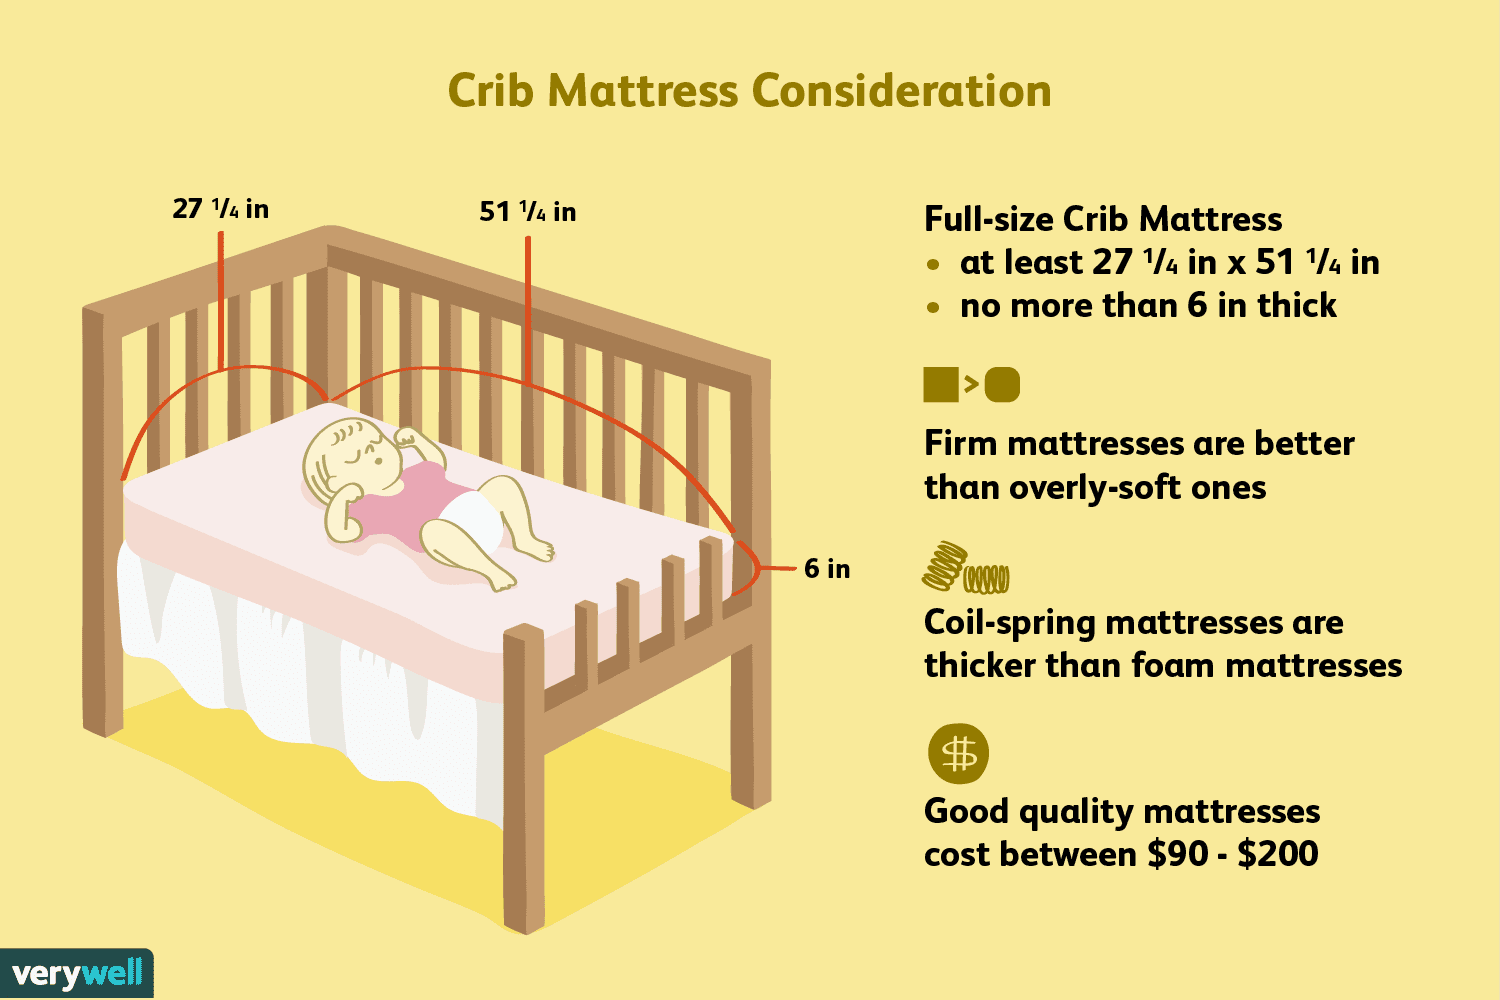 A Parent’s Guide to Buying the Right Crib Mattress